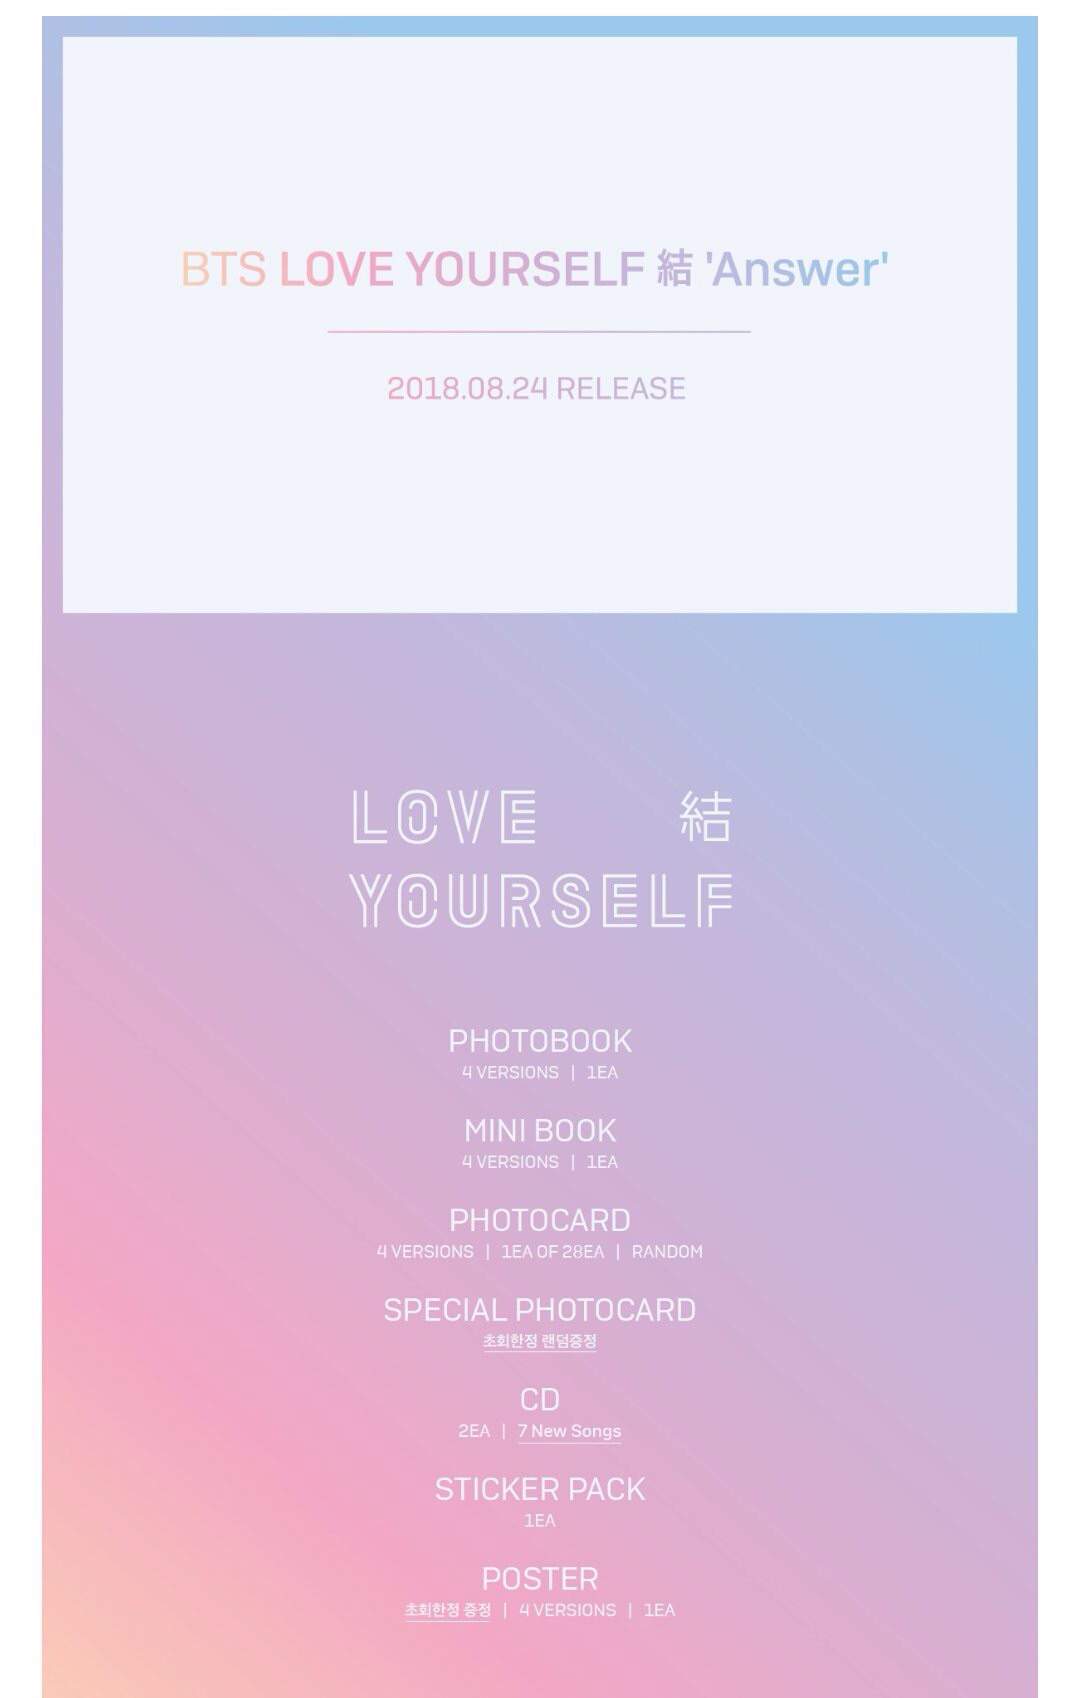 BTS LOVE YOURSELF 結 'Answer' Album Revealed | ARMY's Amino